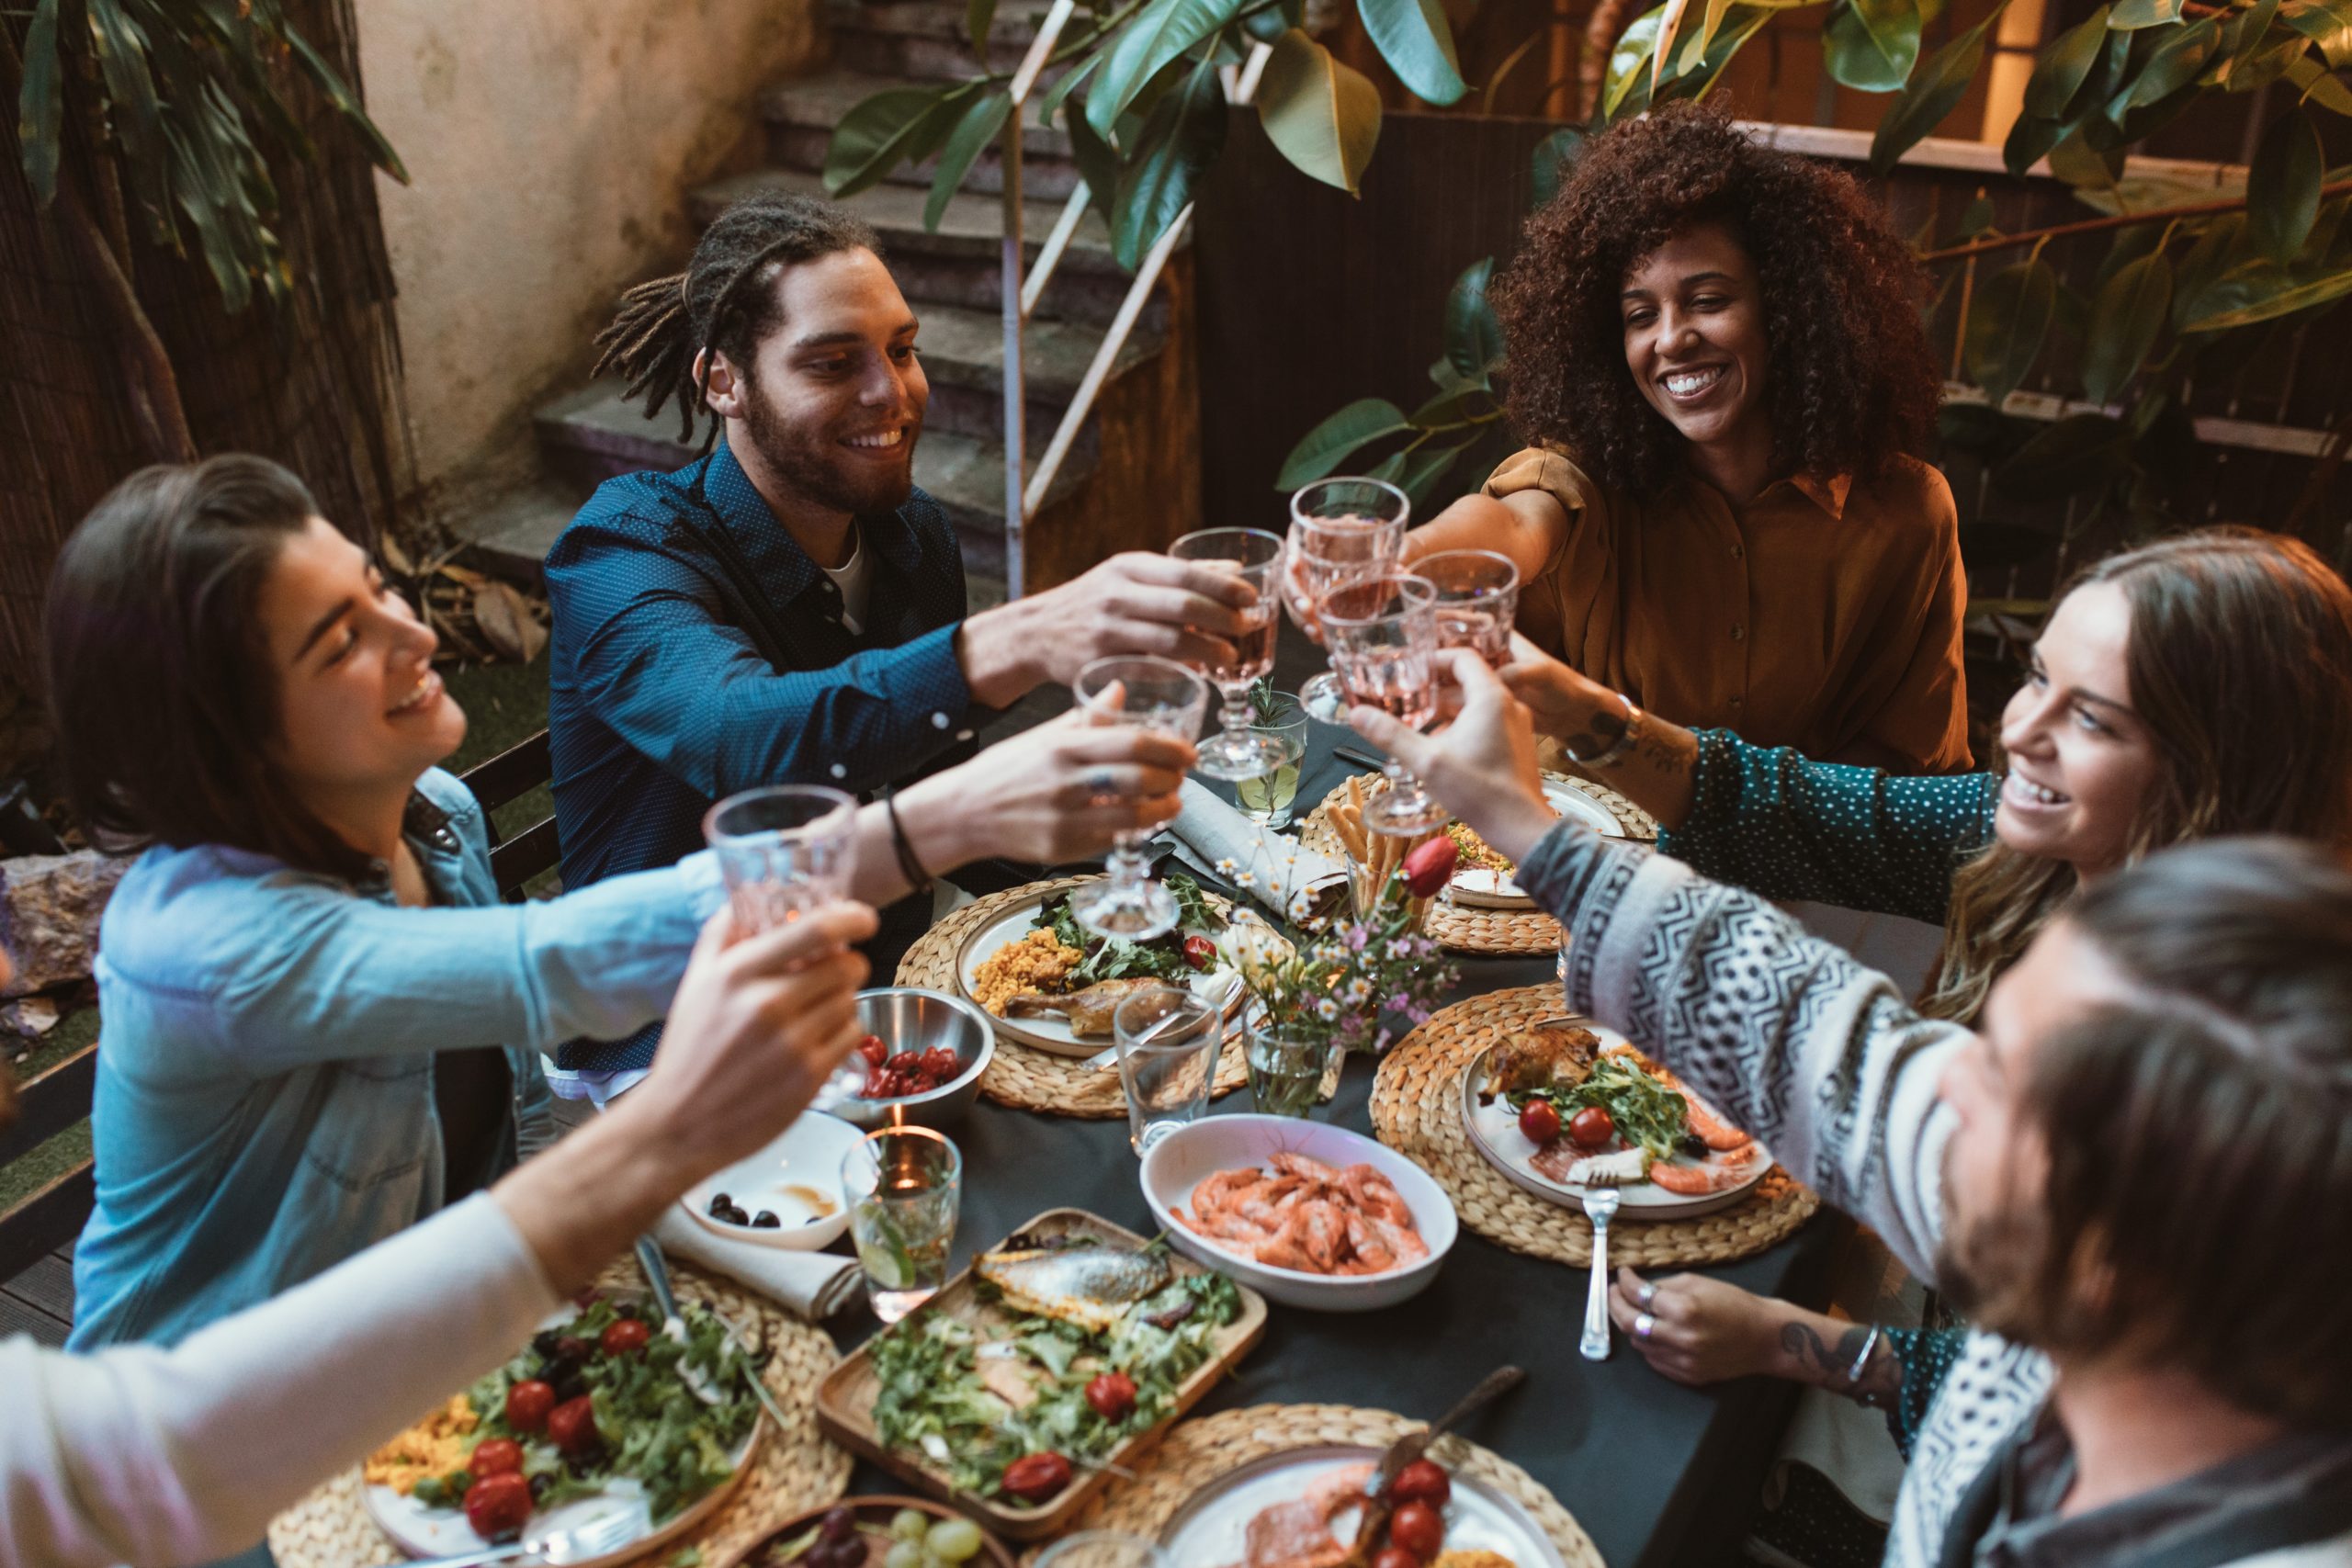 6 tips for stress-free entertaining when you're feeding a crowd